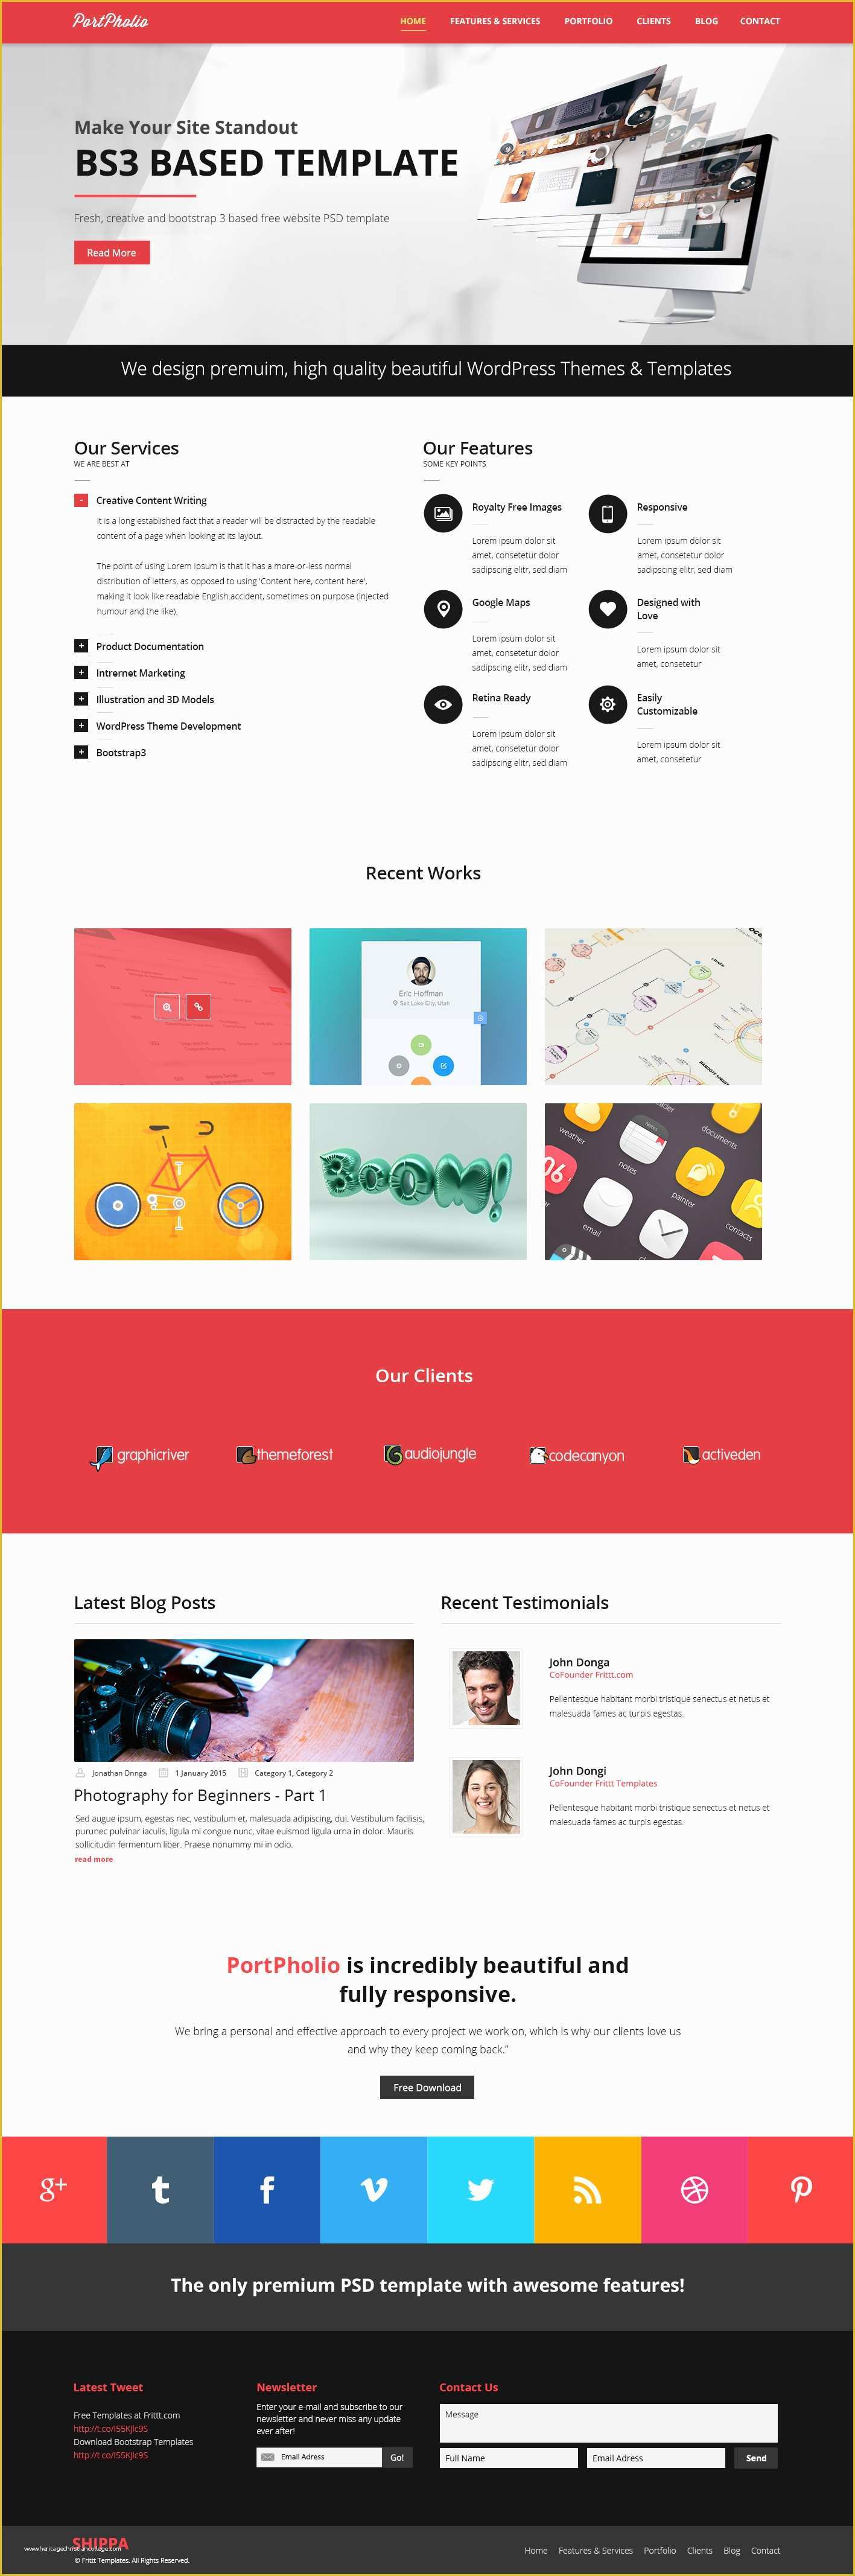 One Page Portfolio Template Free Download Of Portpholio is A Free Portfolio Psd Website Template